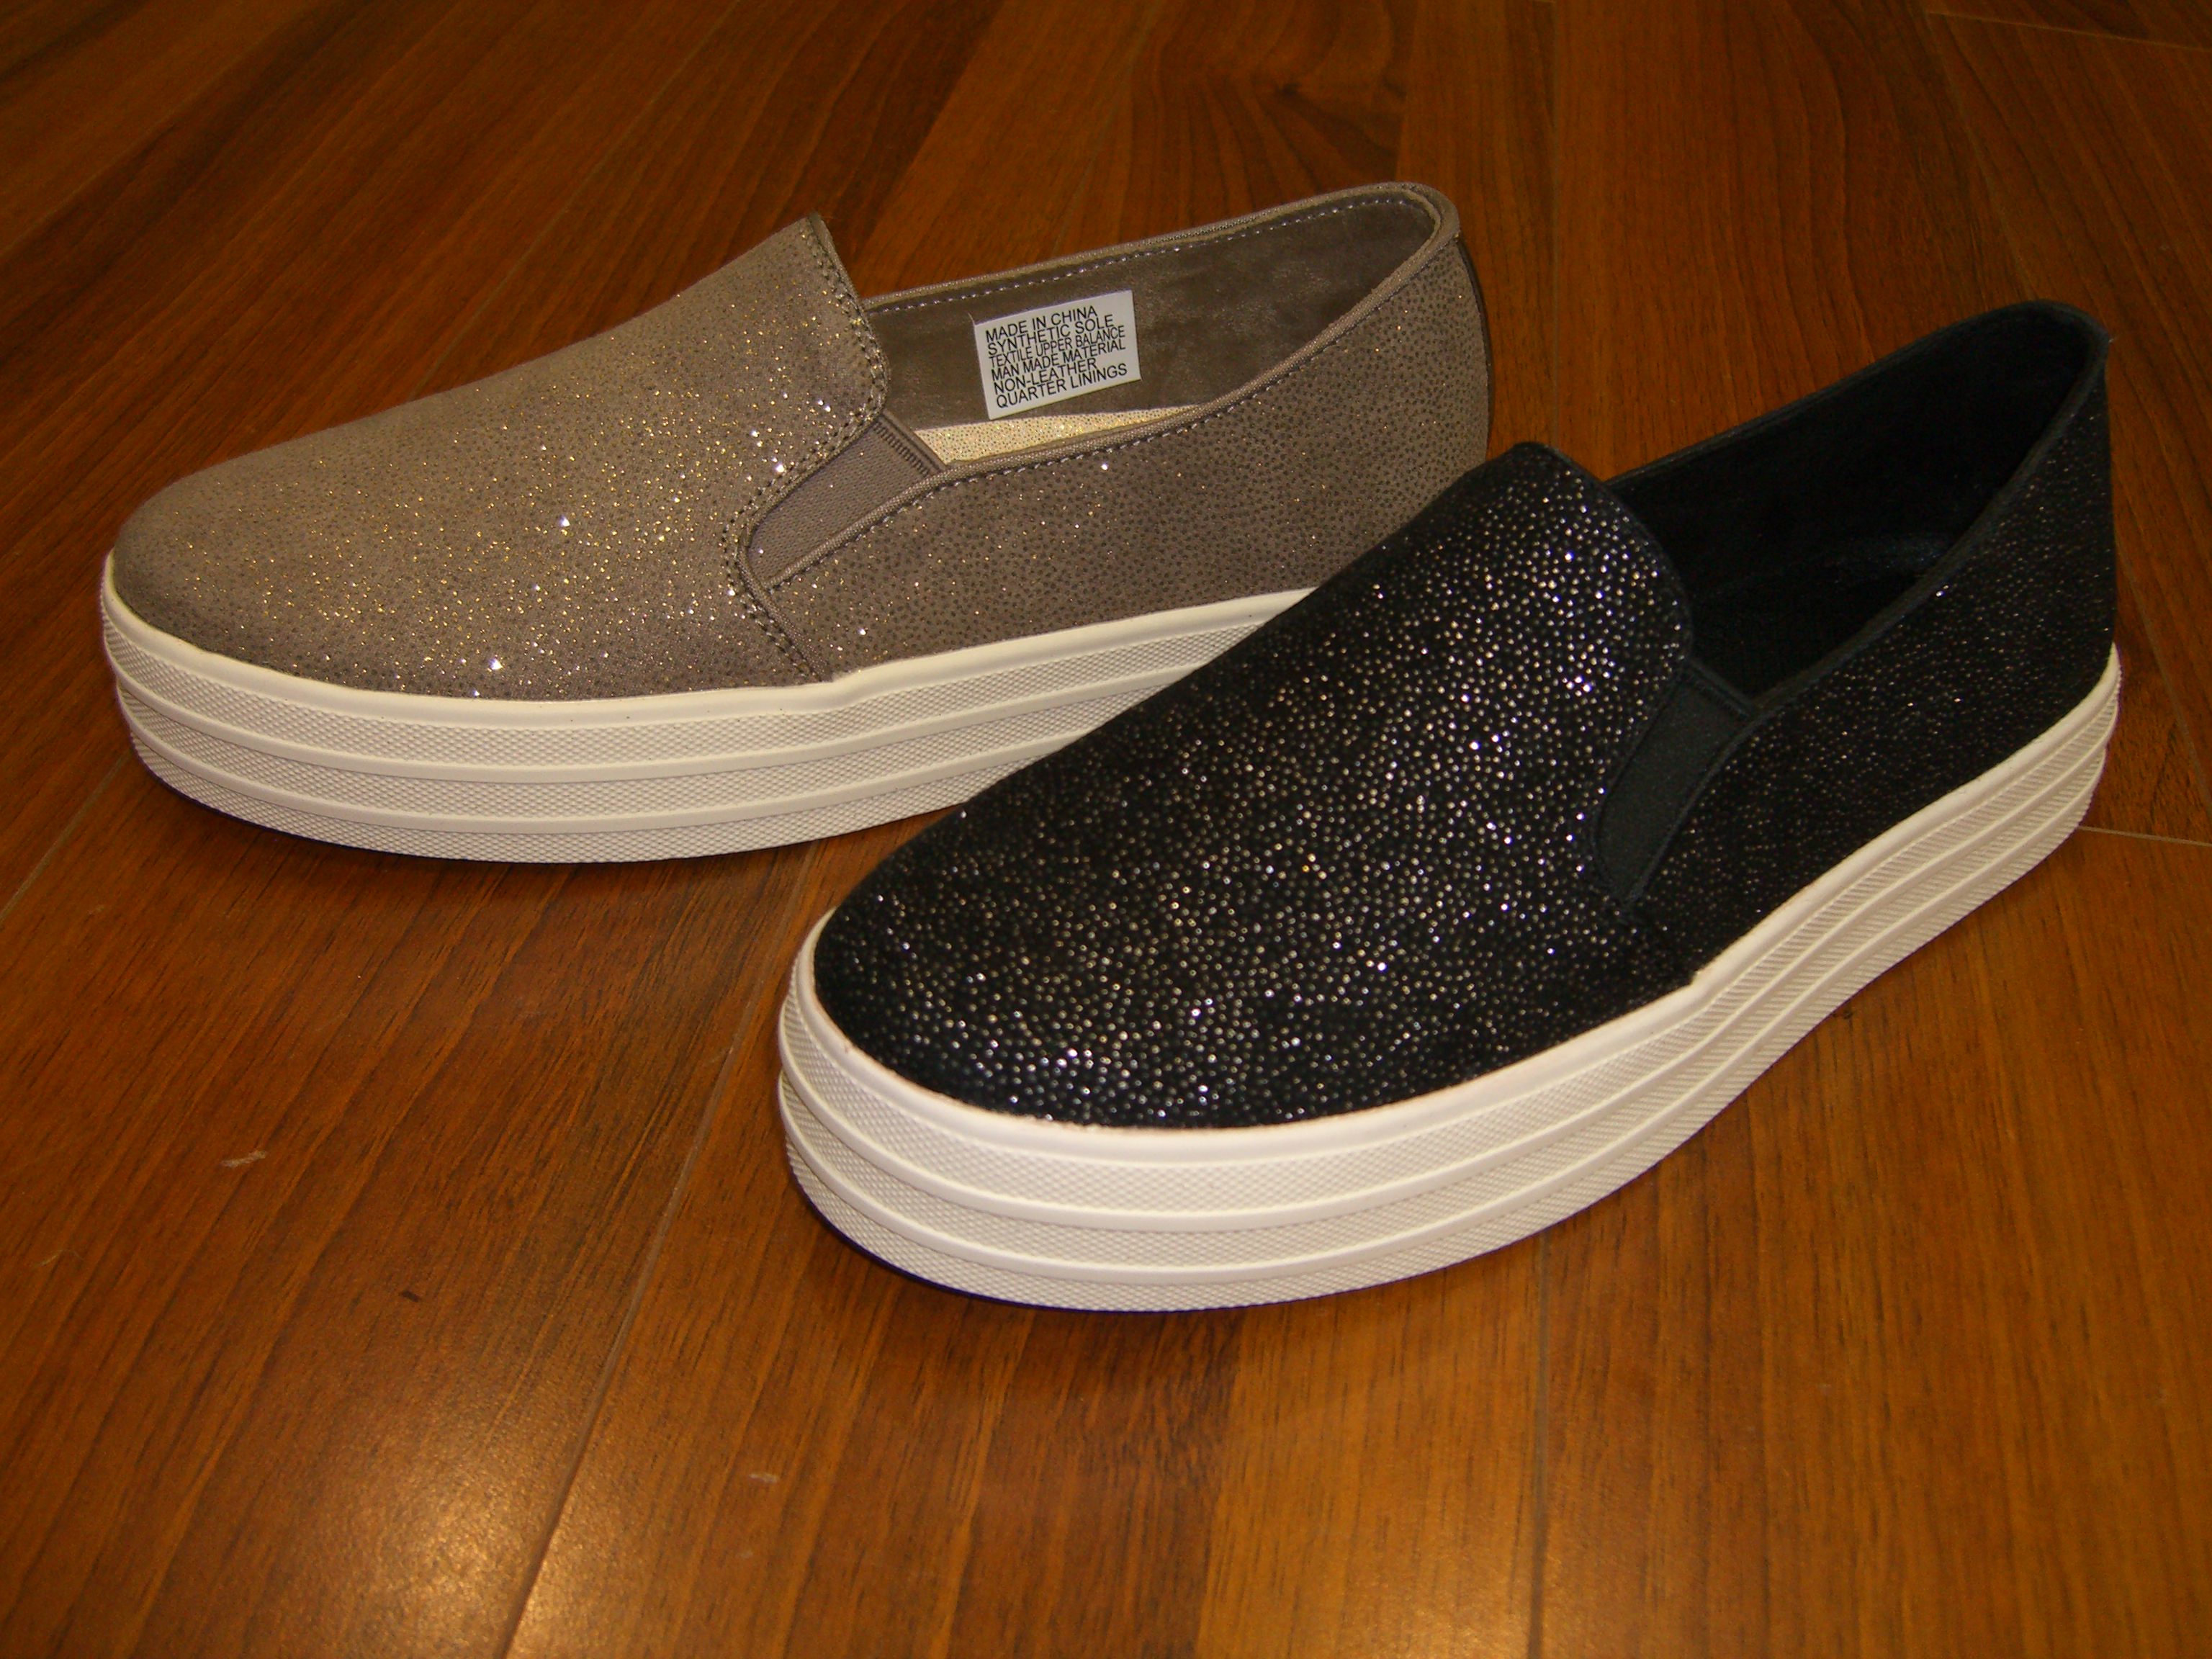 skechers double up fairy dusted